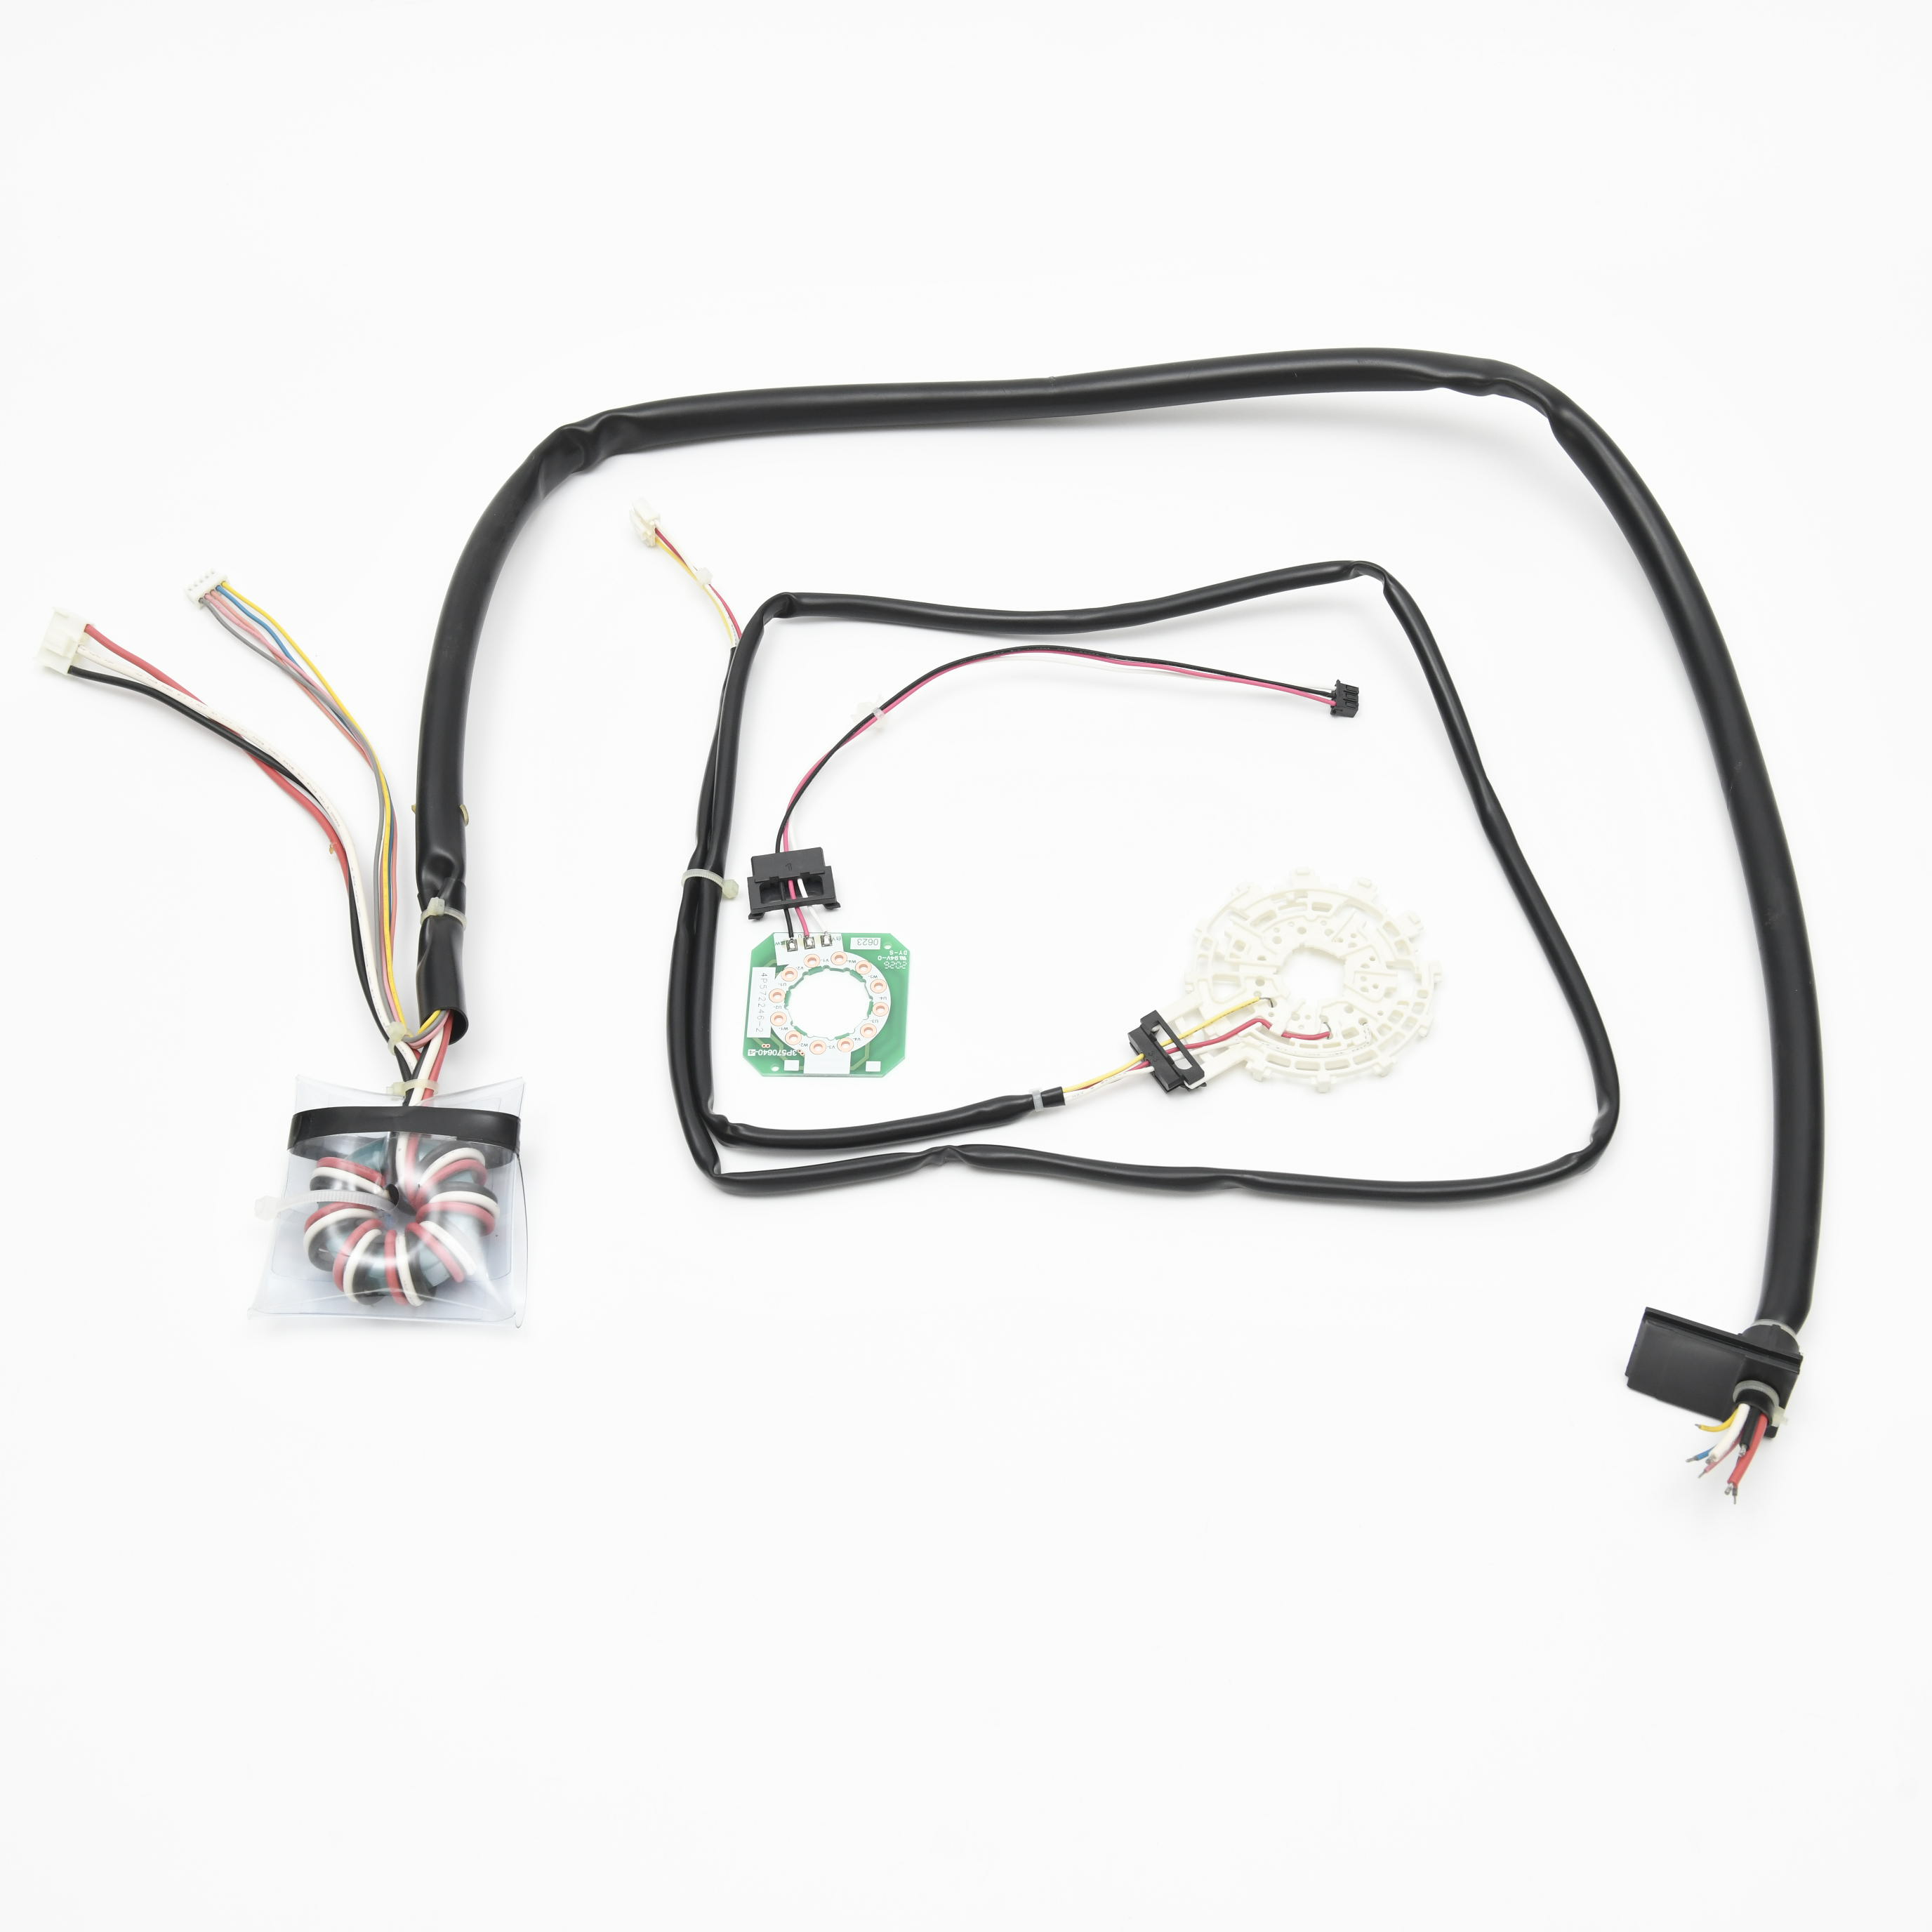 Air conditioner motor wiring harness